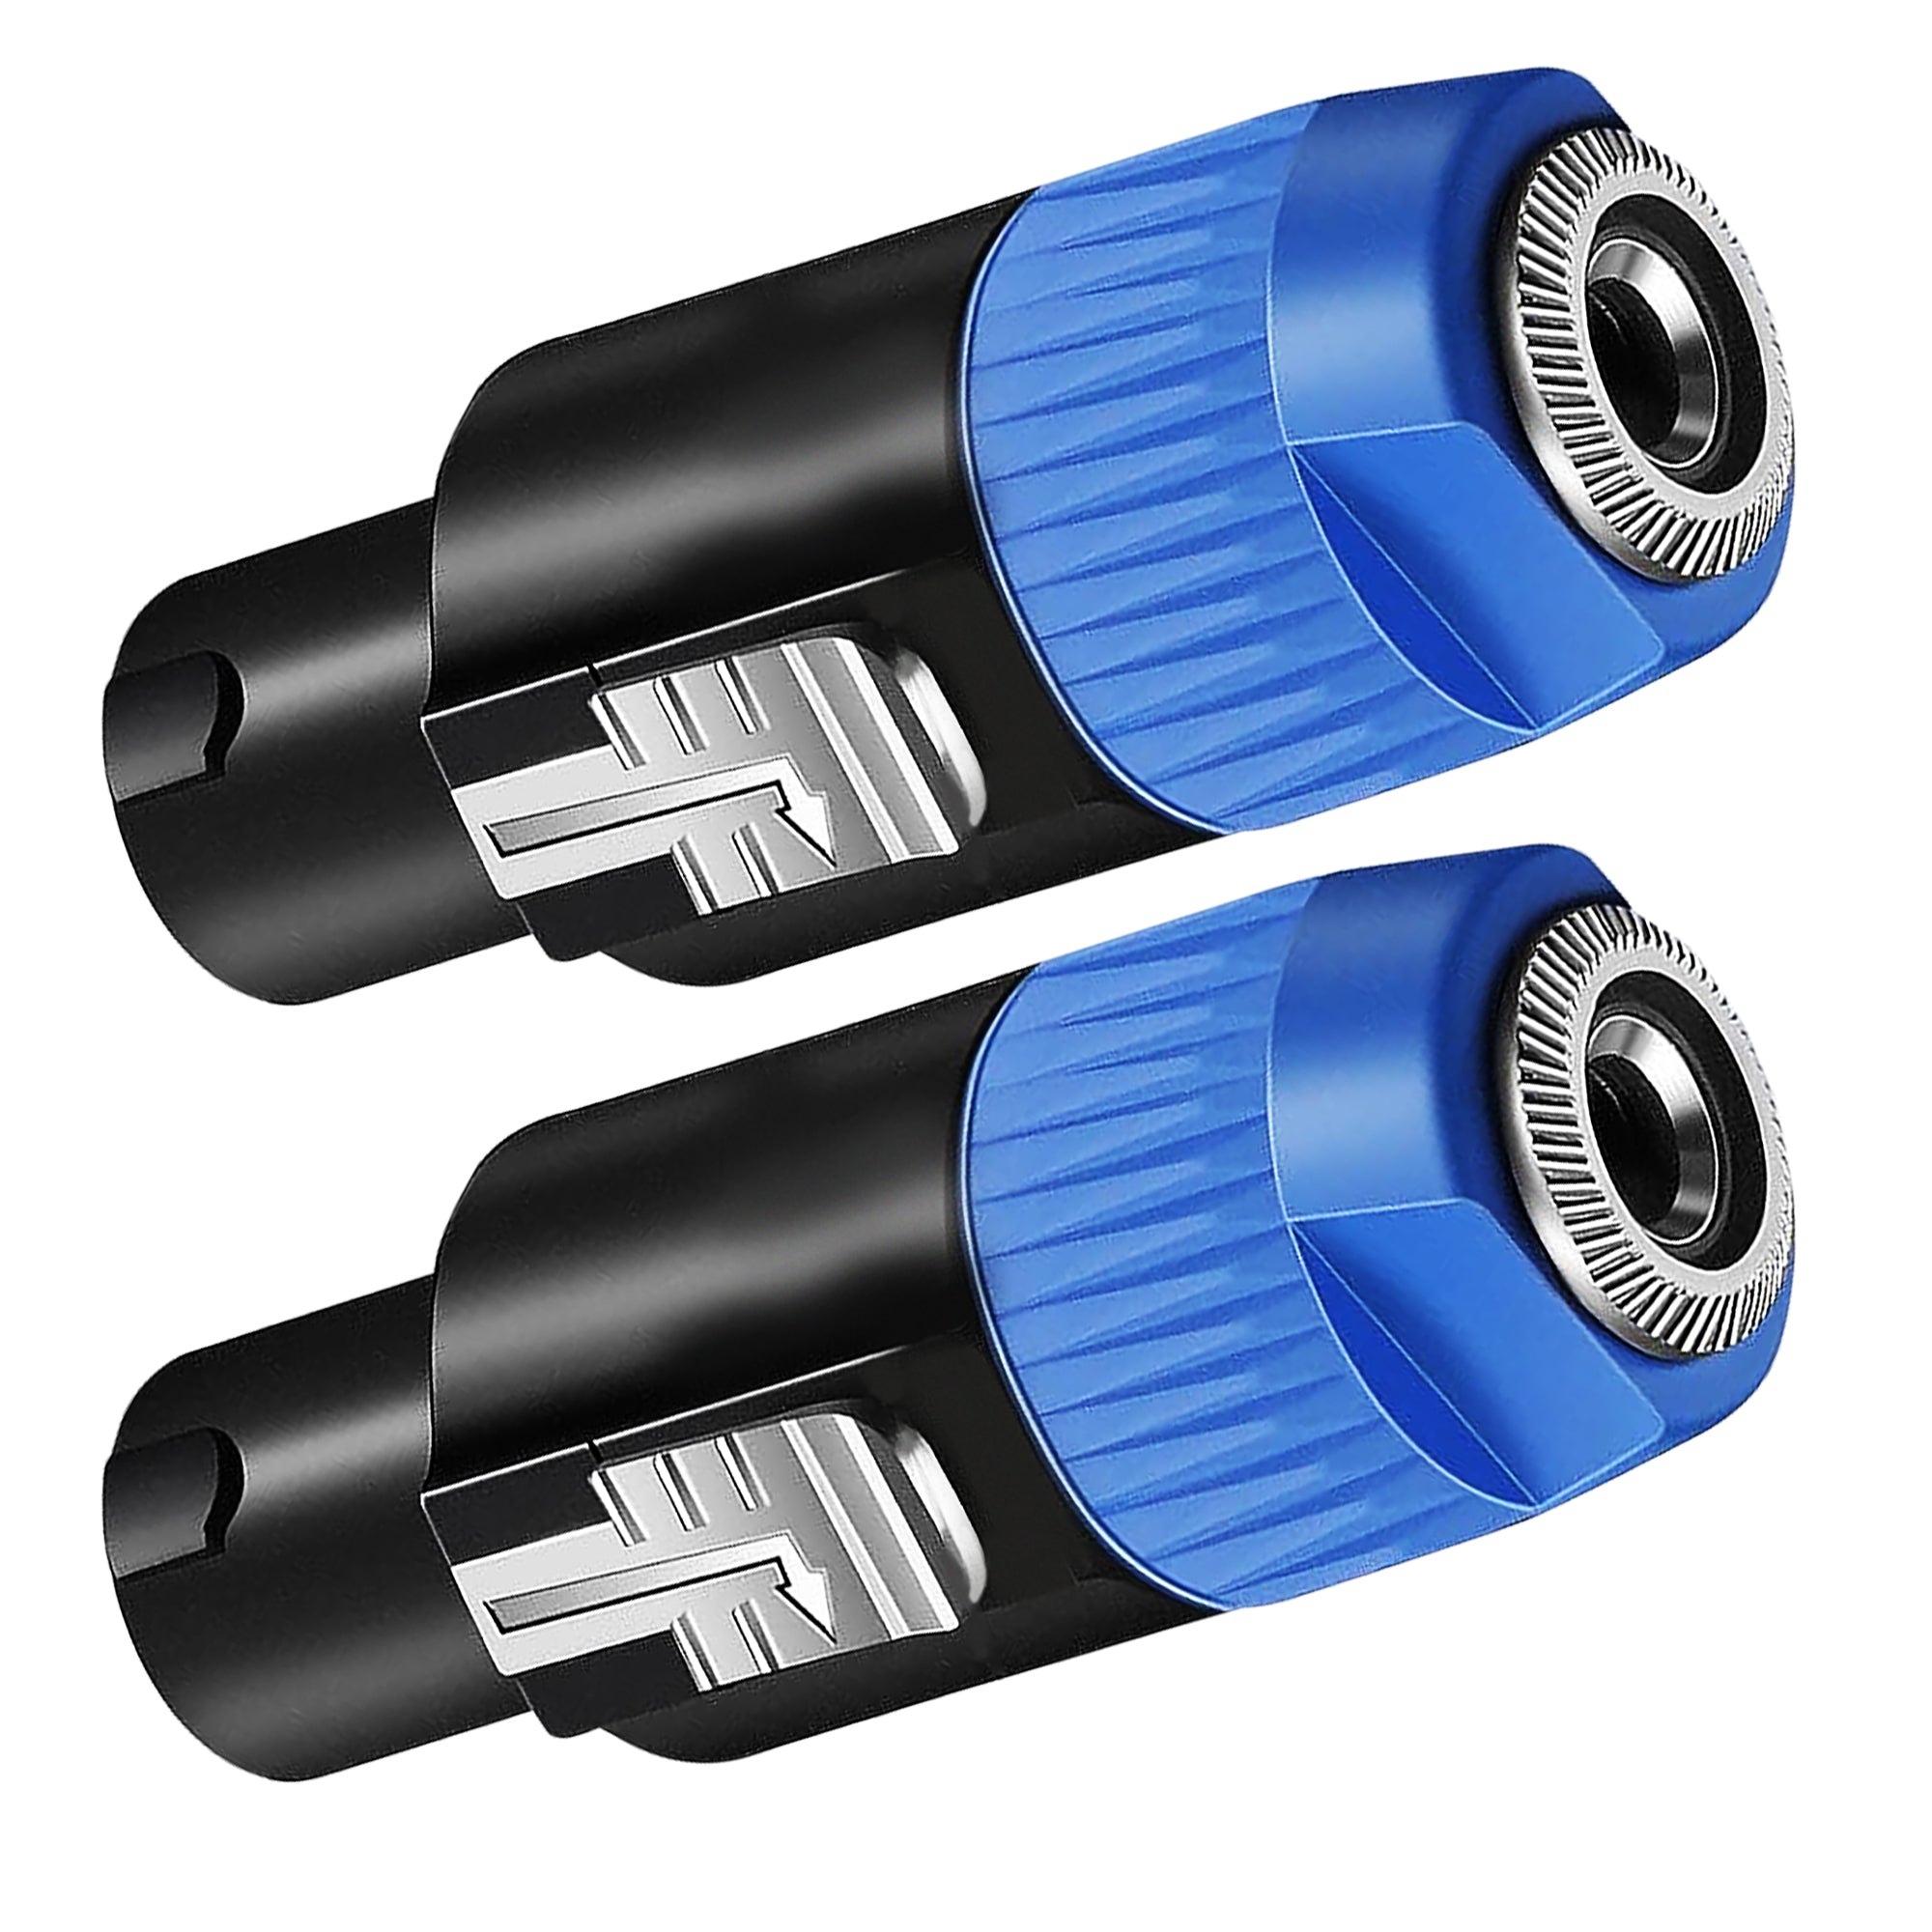 5 Core Speakon Adapter 2 Pack  High Quality Audio Jack Male Audio Pin  Speaker Adapter Connector